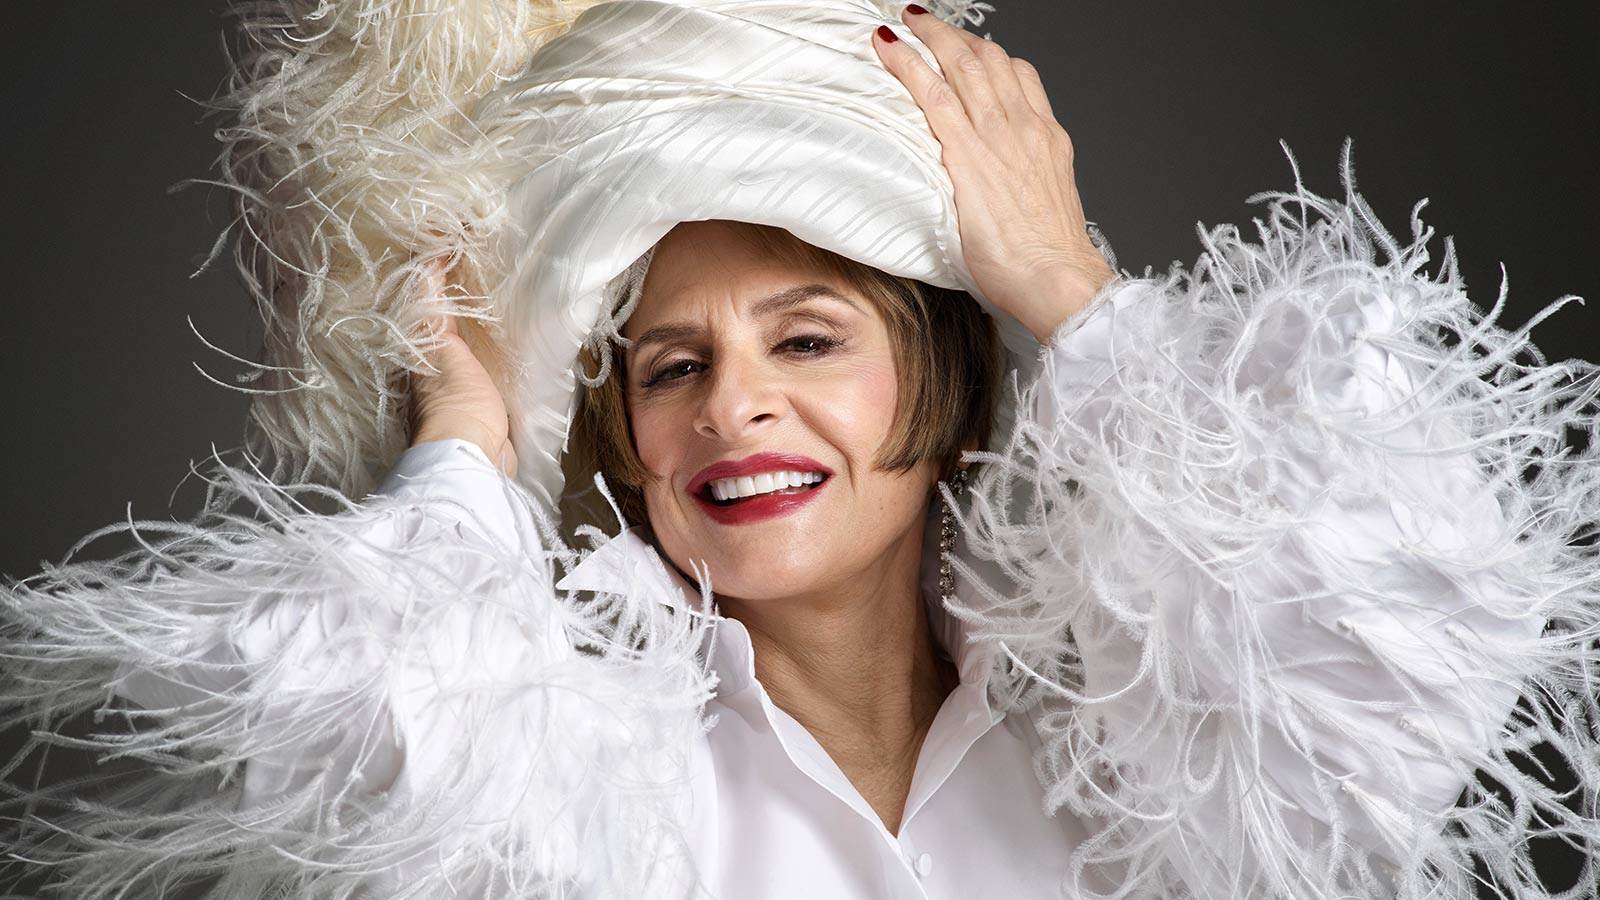 Patti Lupone in white outfits surrounded with feathers on sleeves and hat